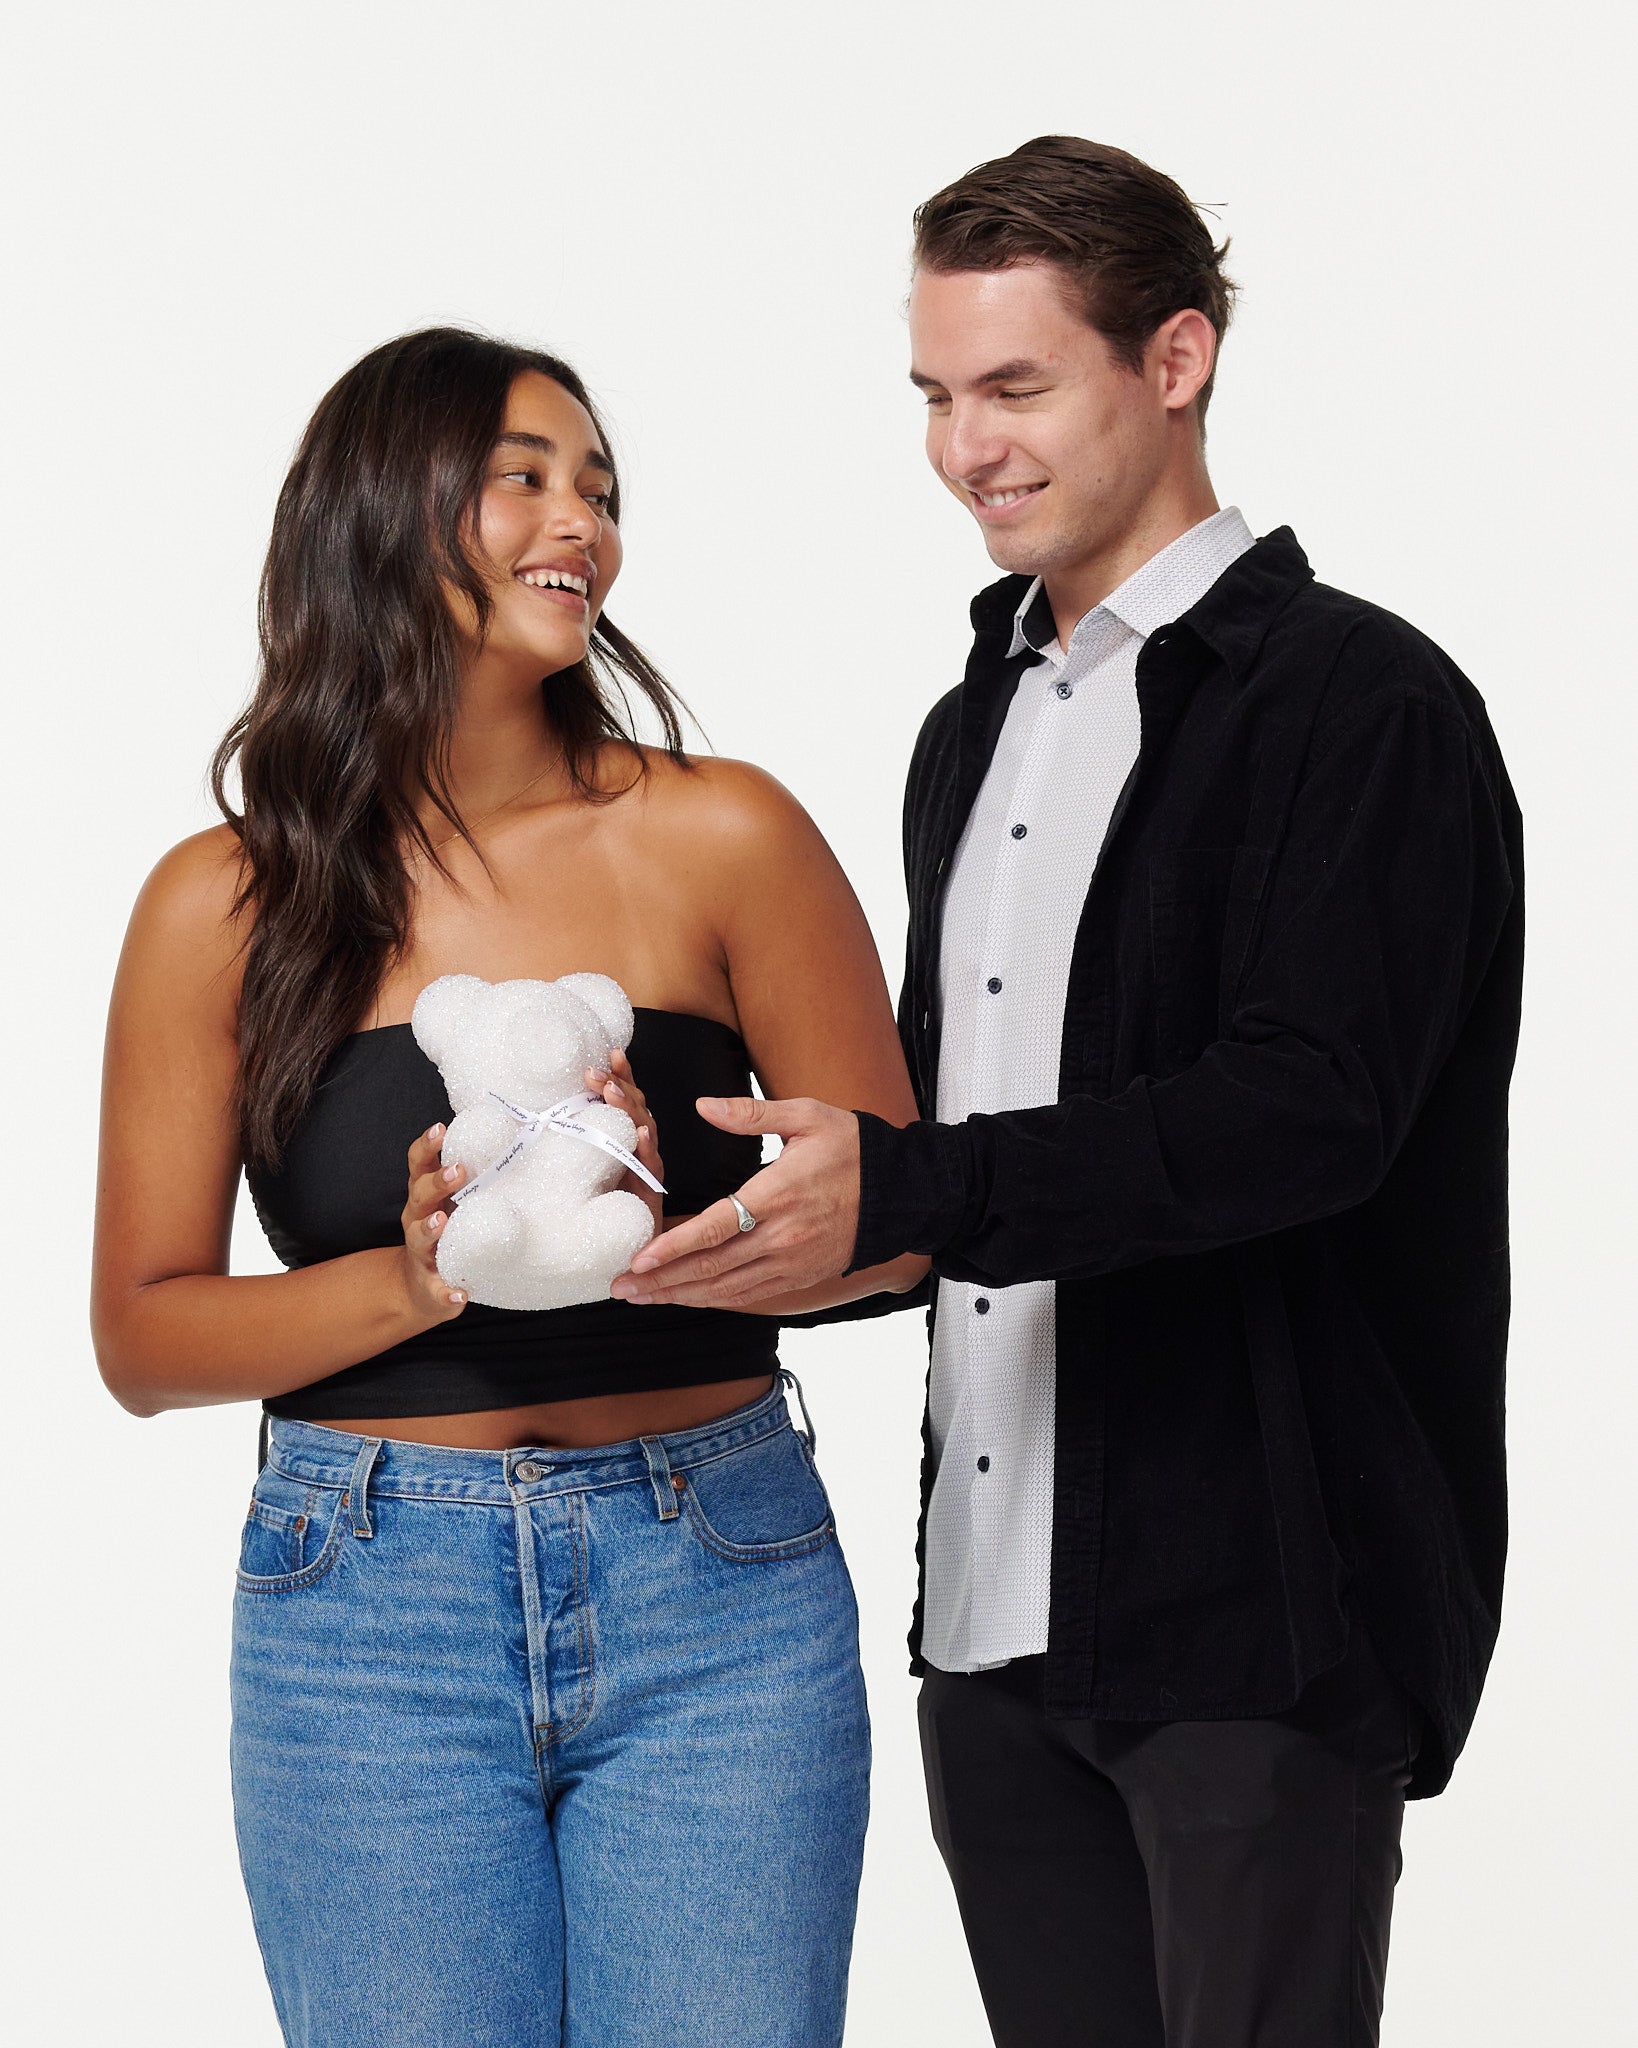 A woman in a black top and blue jeans smiles as she holds a white glitter bear with a white ribbon, while a man in a black jacket and white shirt looks on fondly.